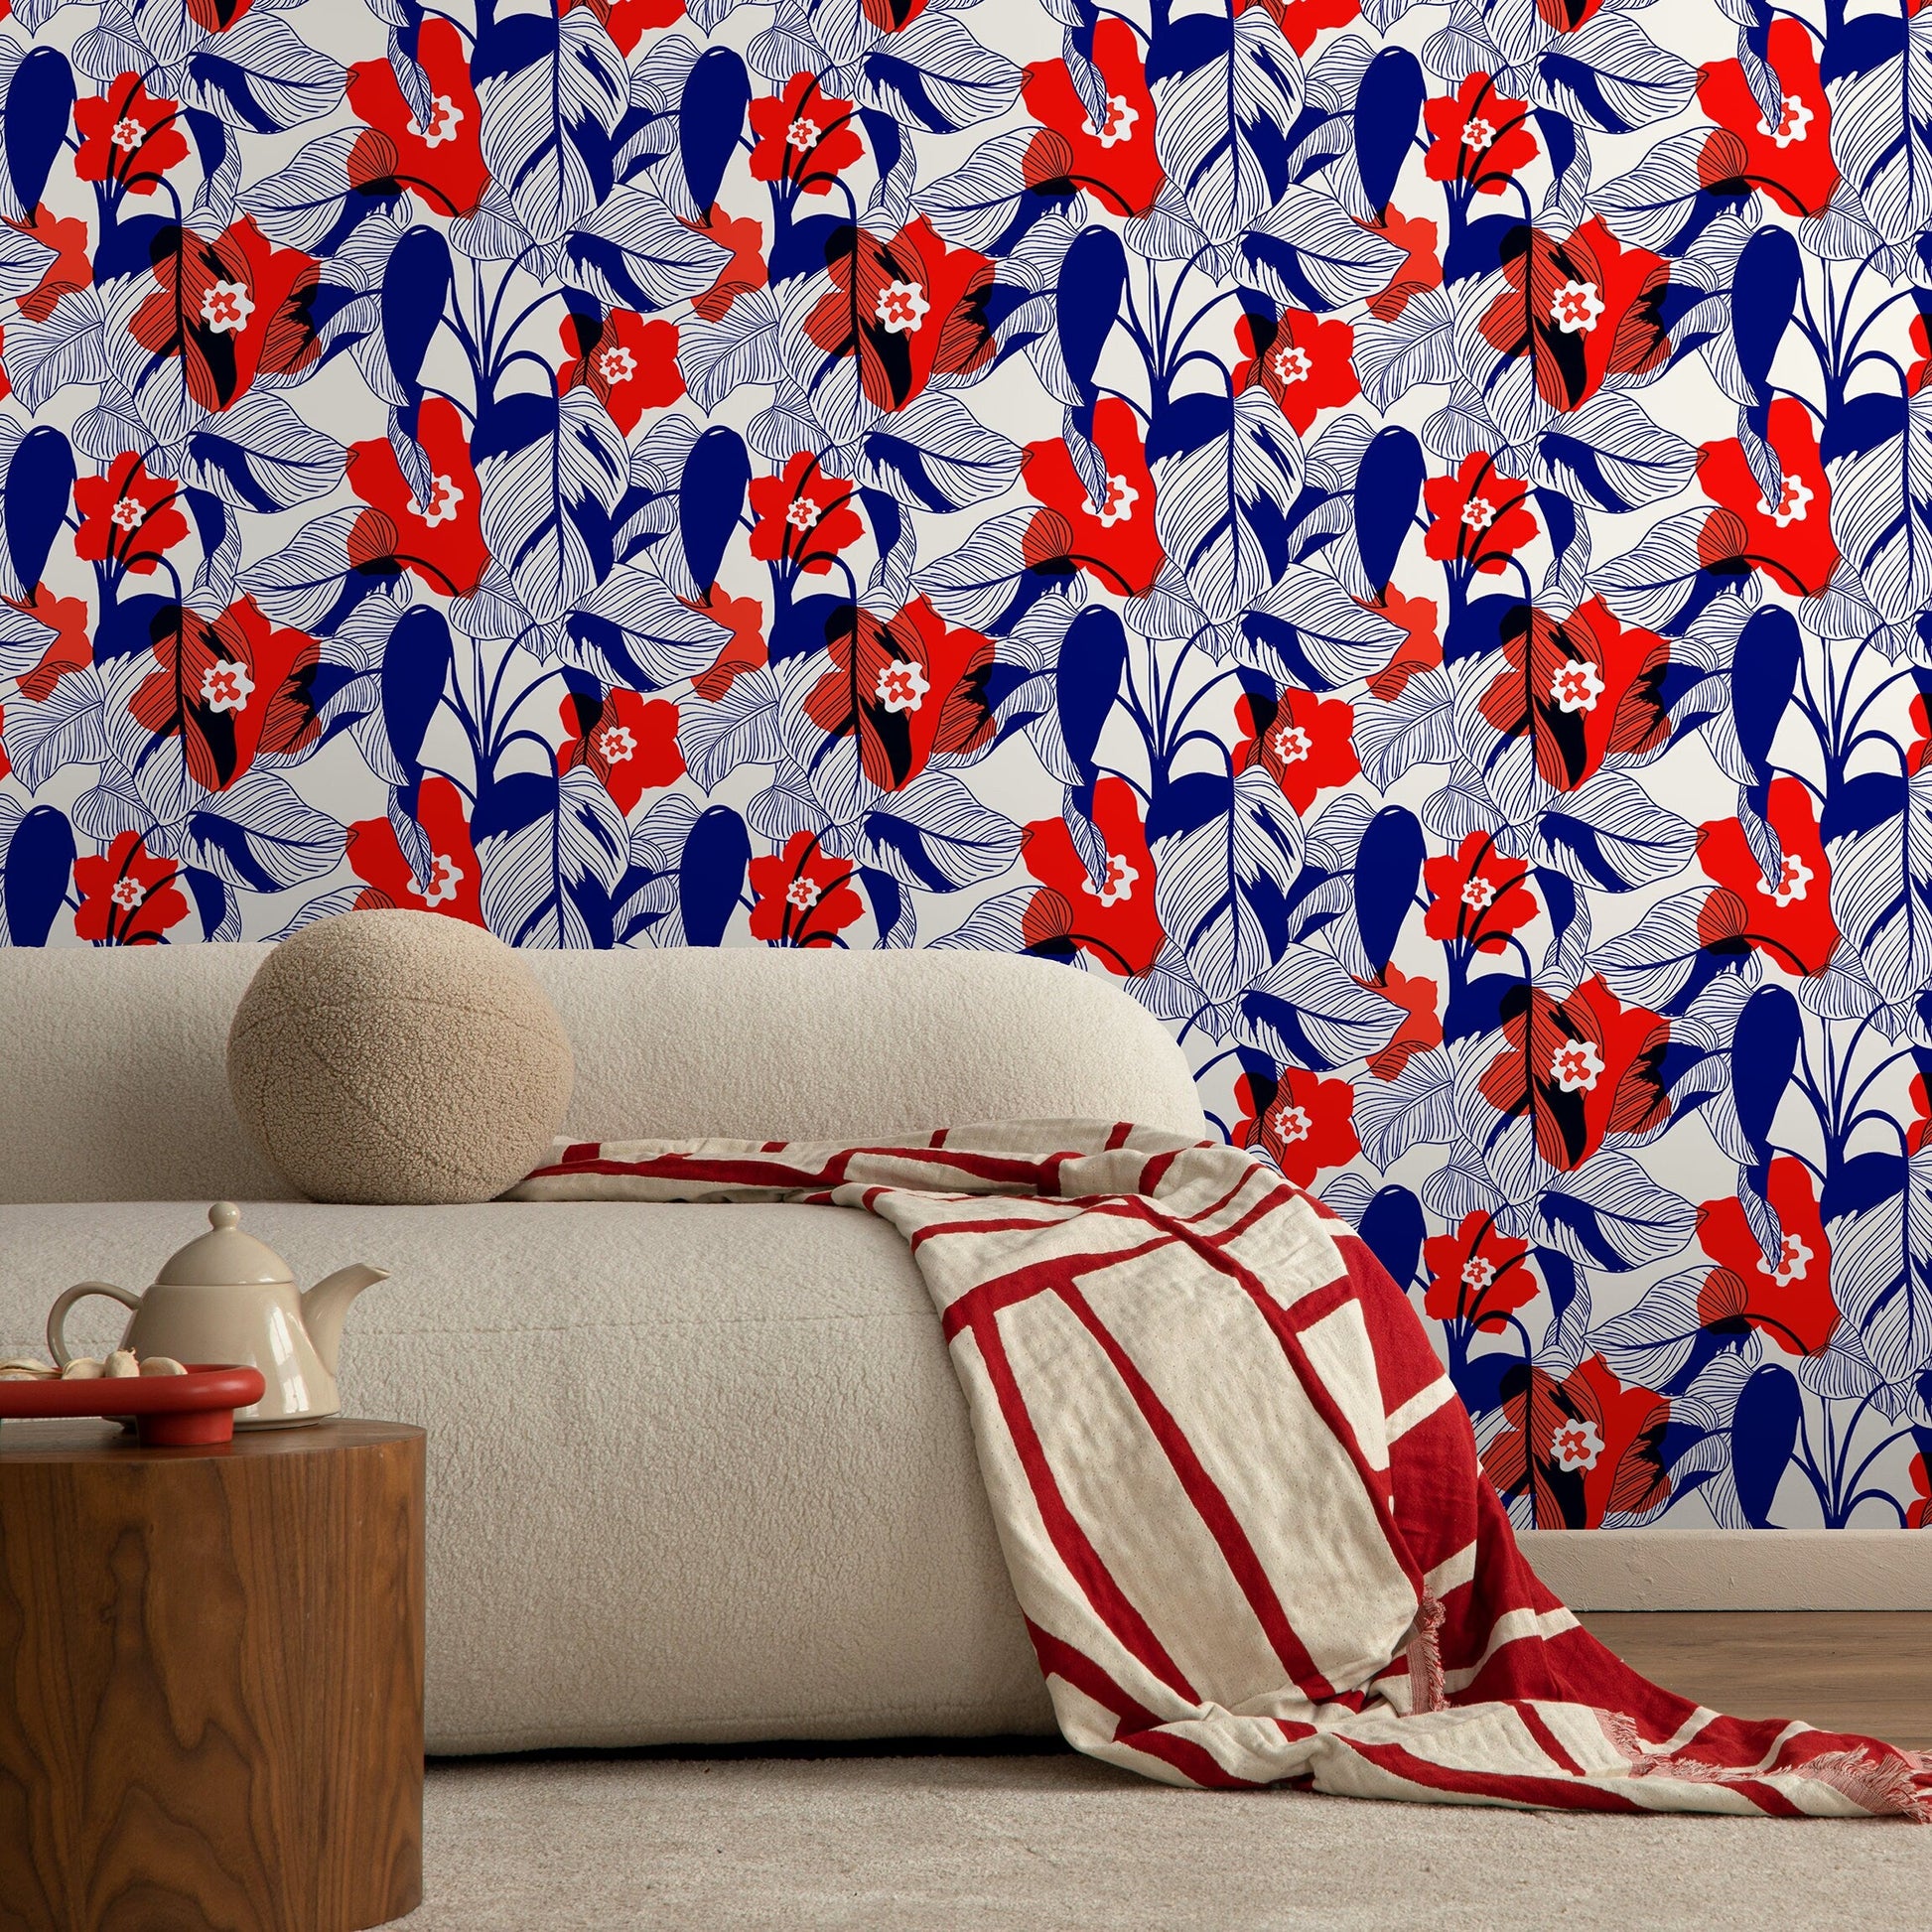 Floral Garden Wallpaper Blue and Red Wallpaper Peel and Stick and Traditional Wallpaper - CC - A791